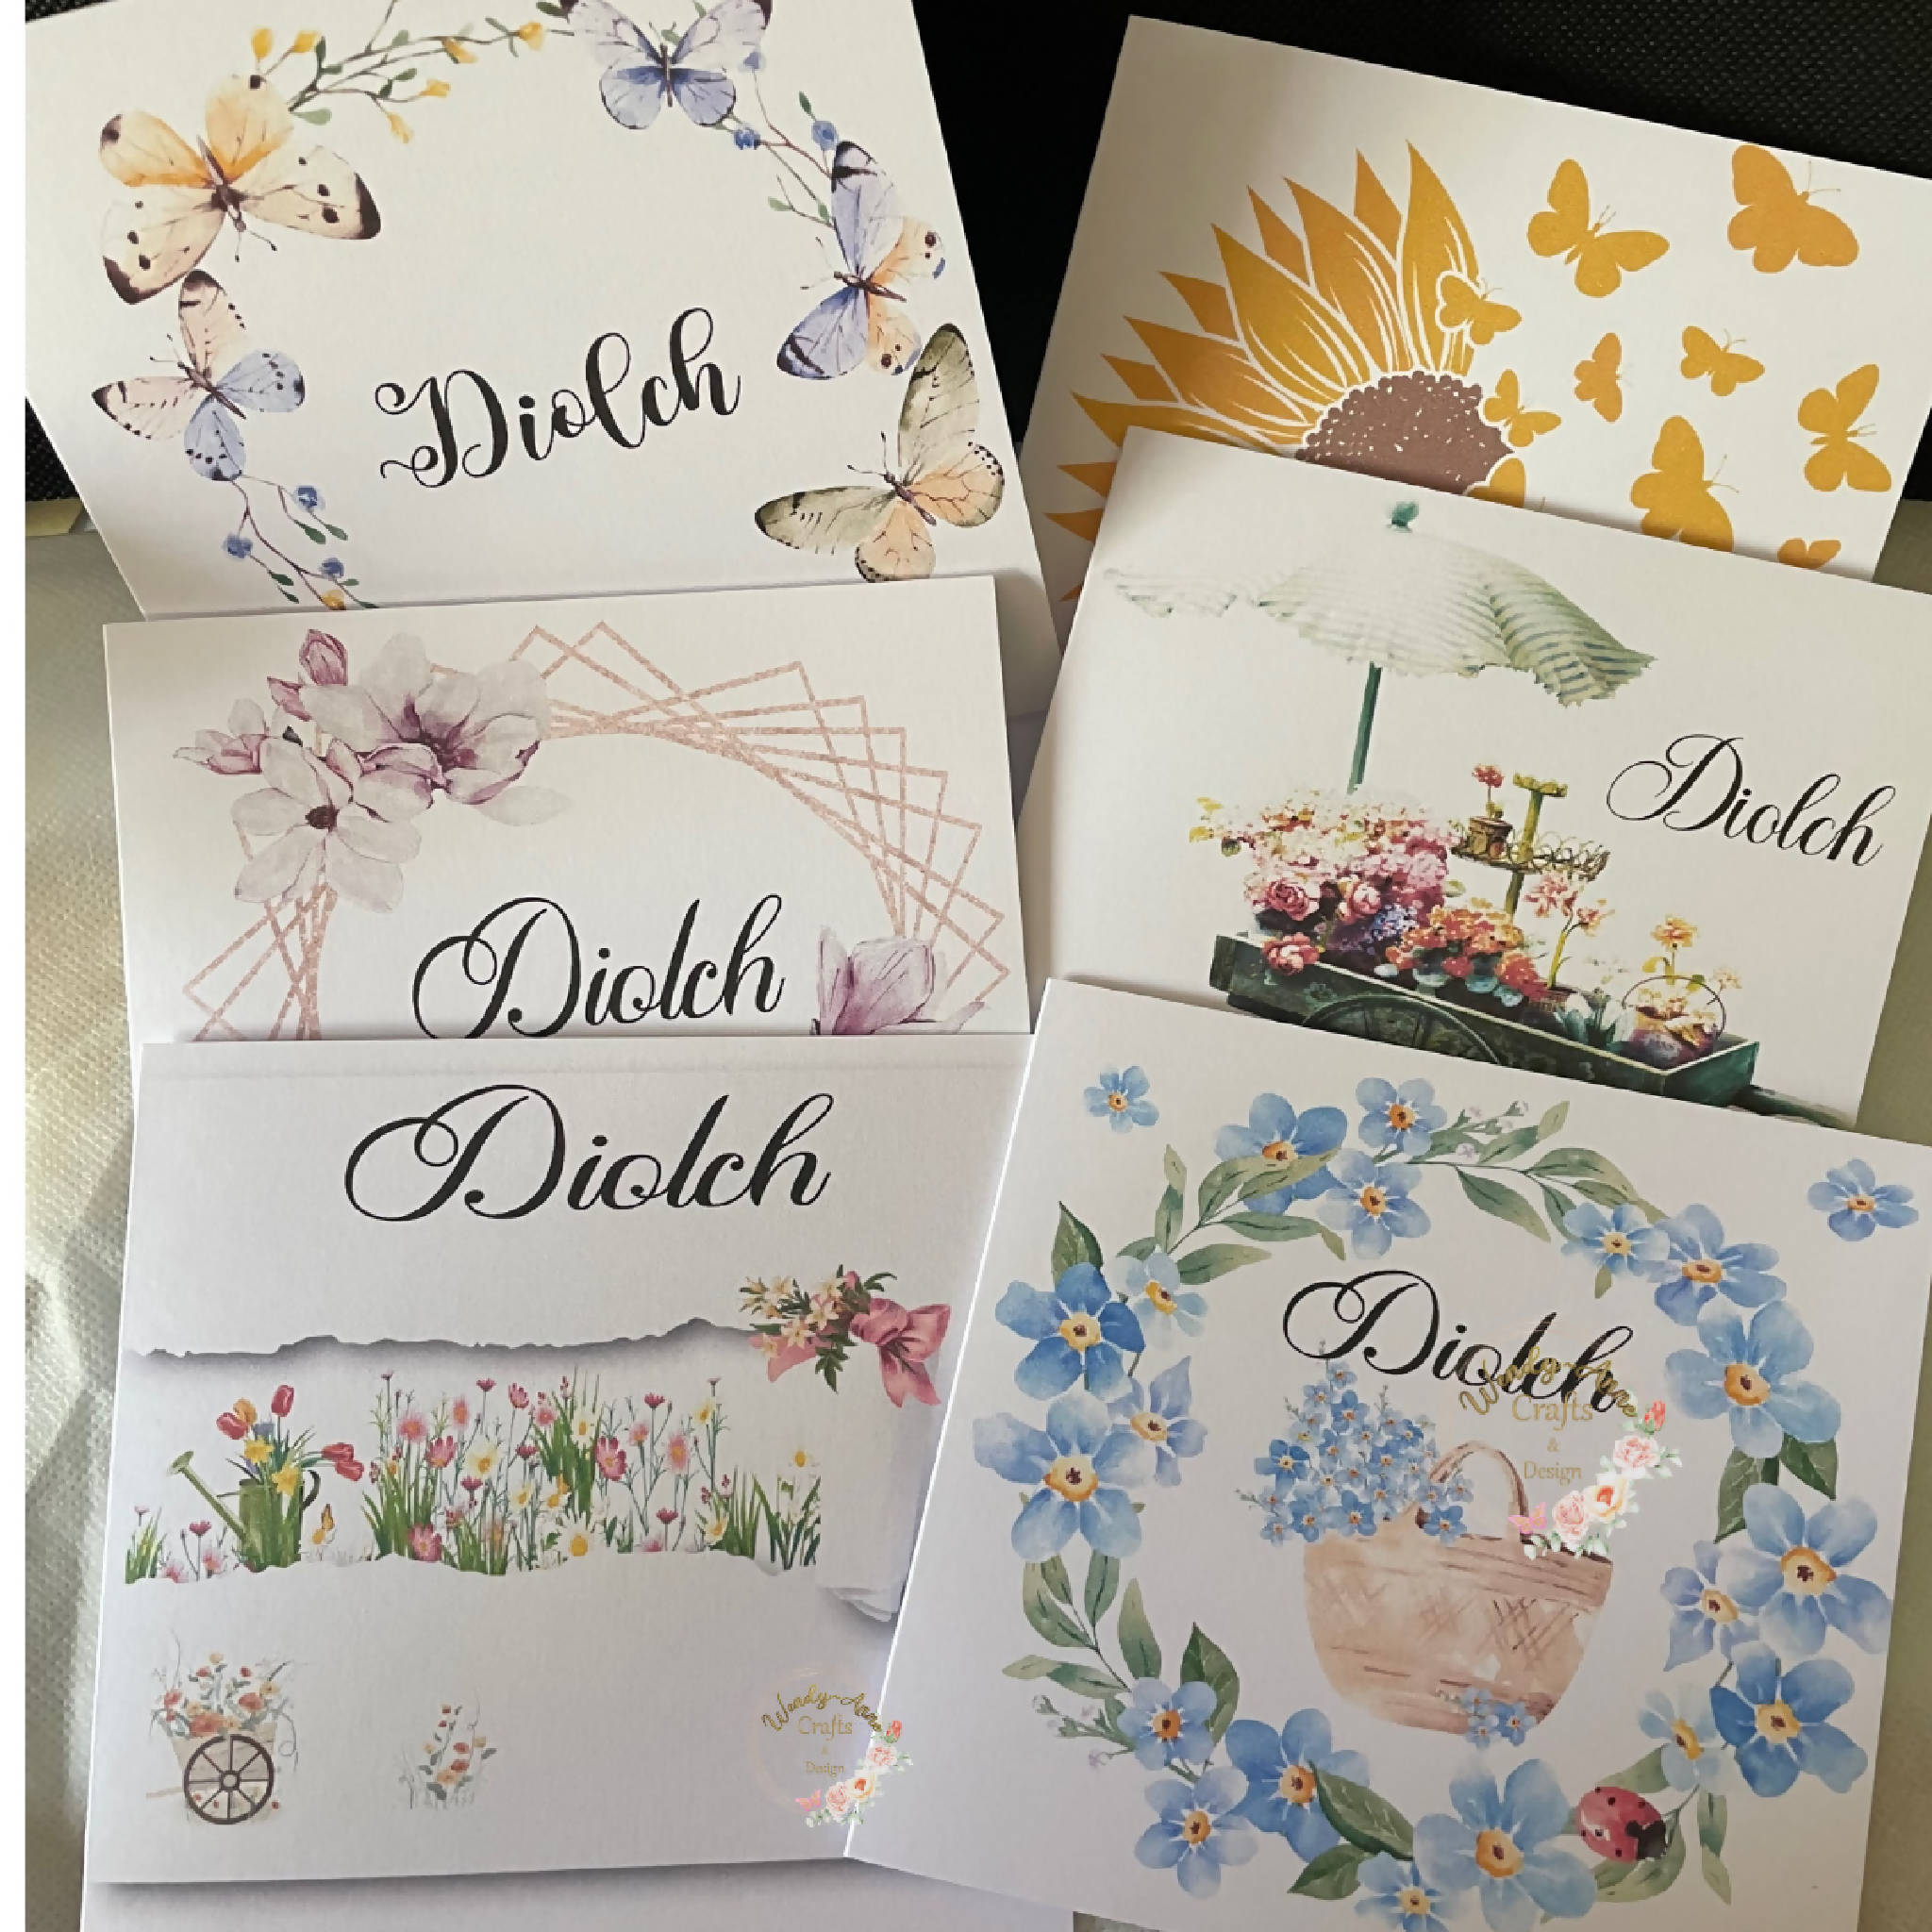 Box of 6 Diolch notecards